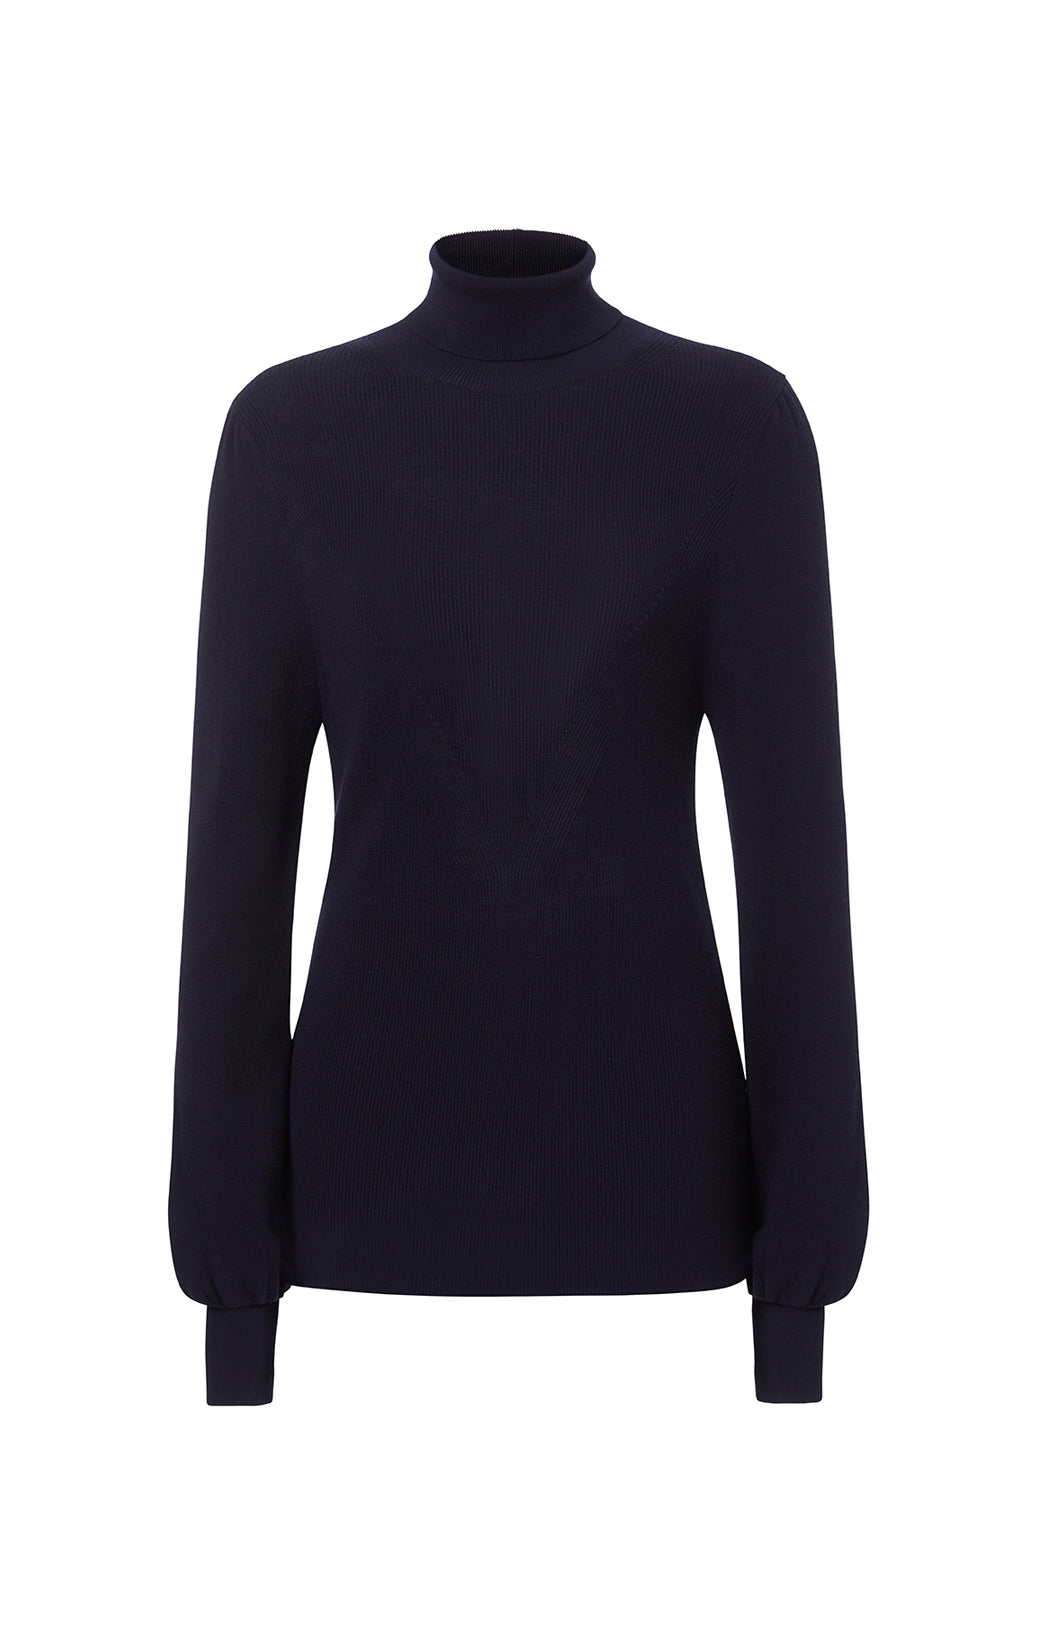 Curvaceous - Ribbed Navy Cardigan Sweater